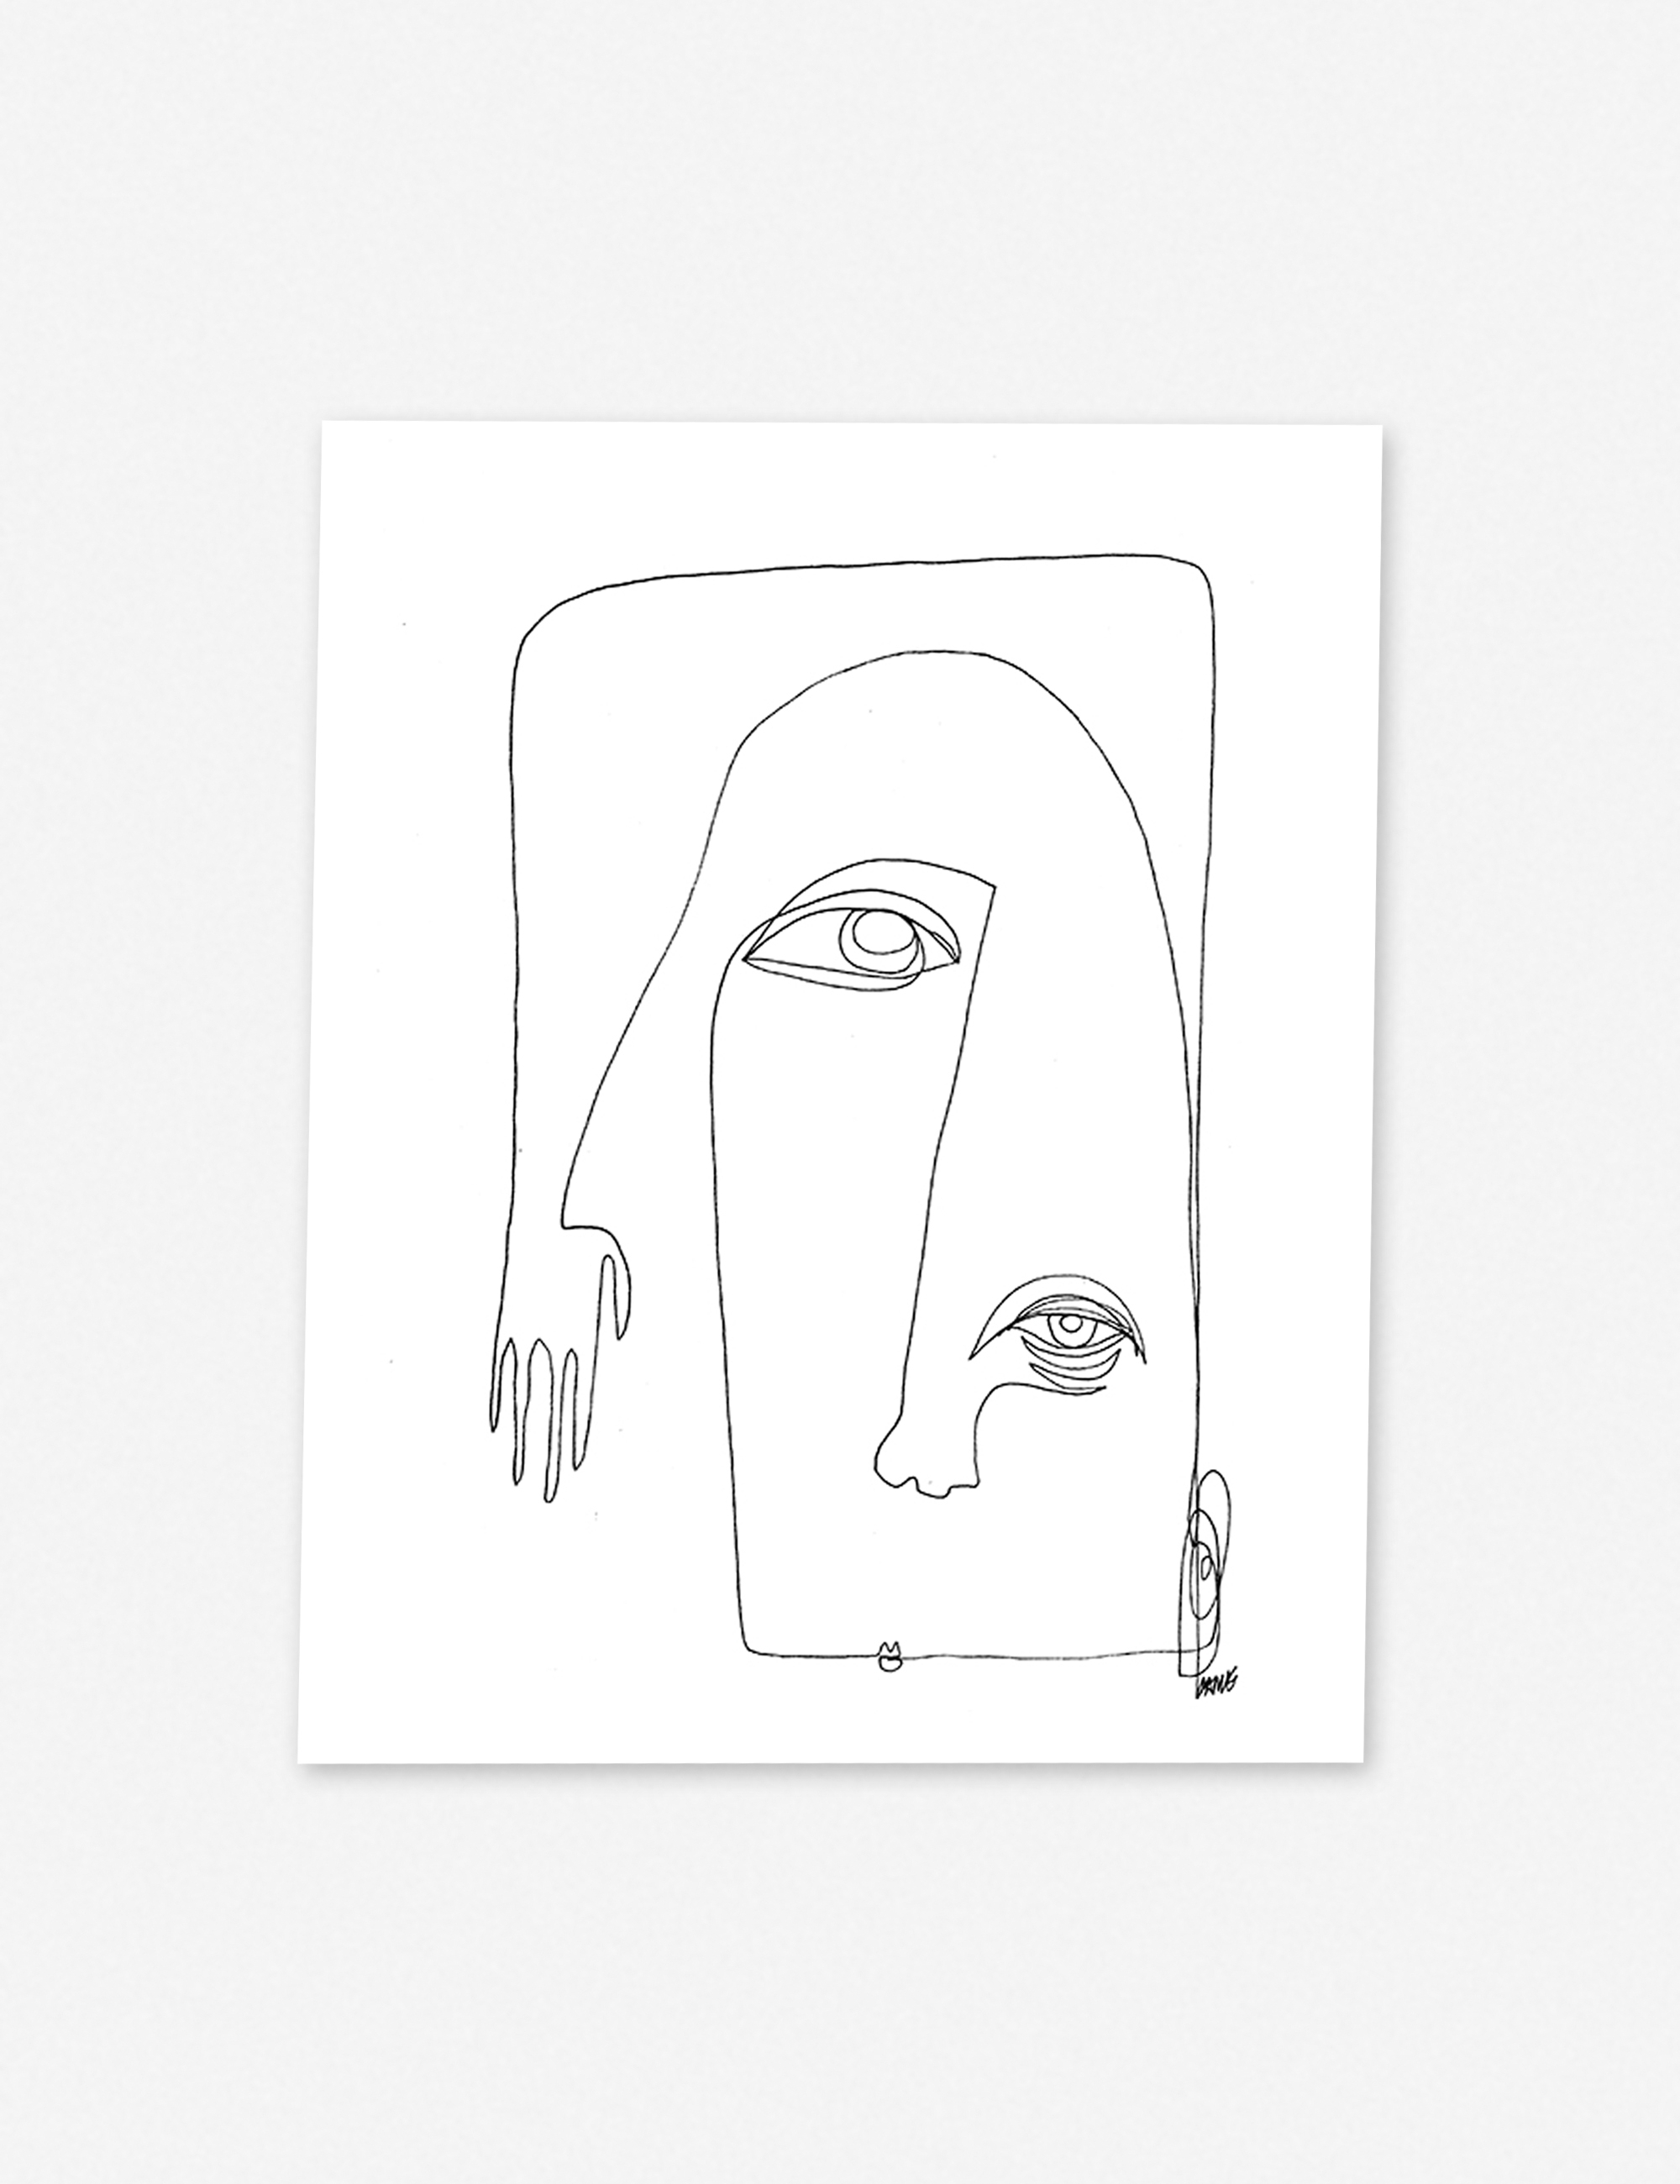 Picasso Print by Damienne Merlina - Image 1